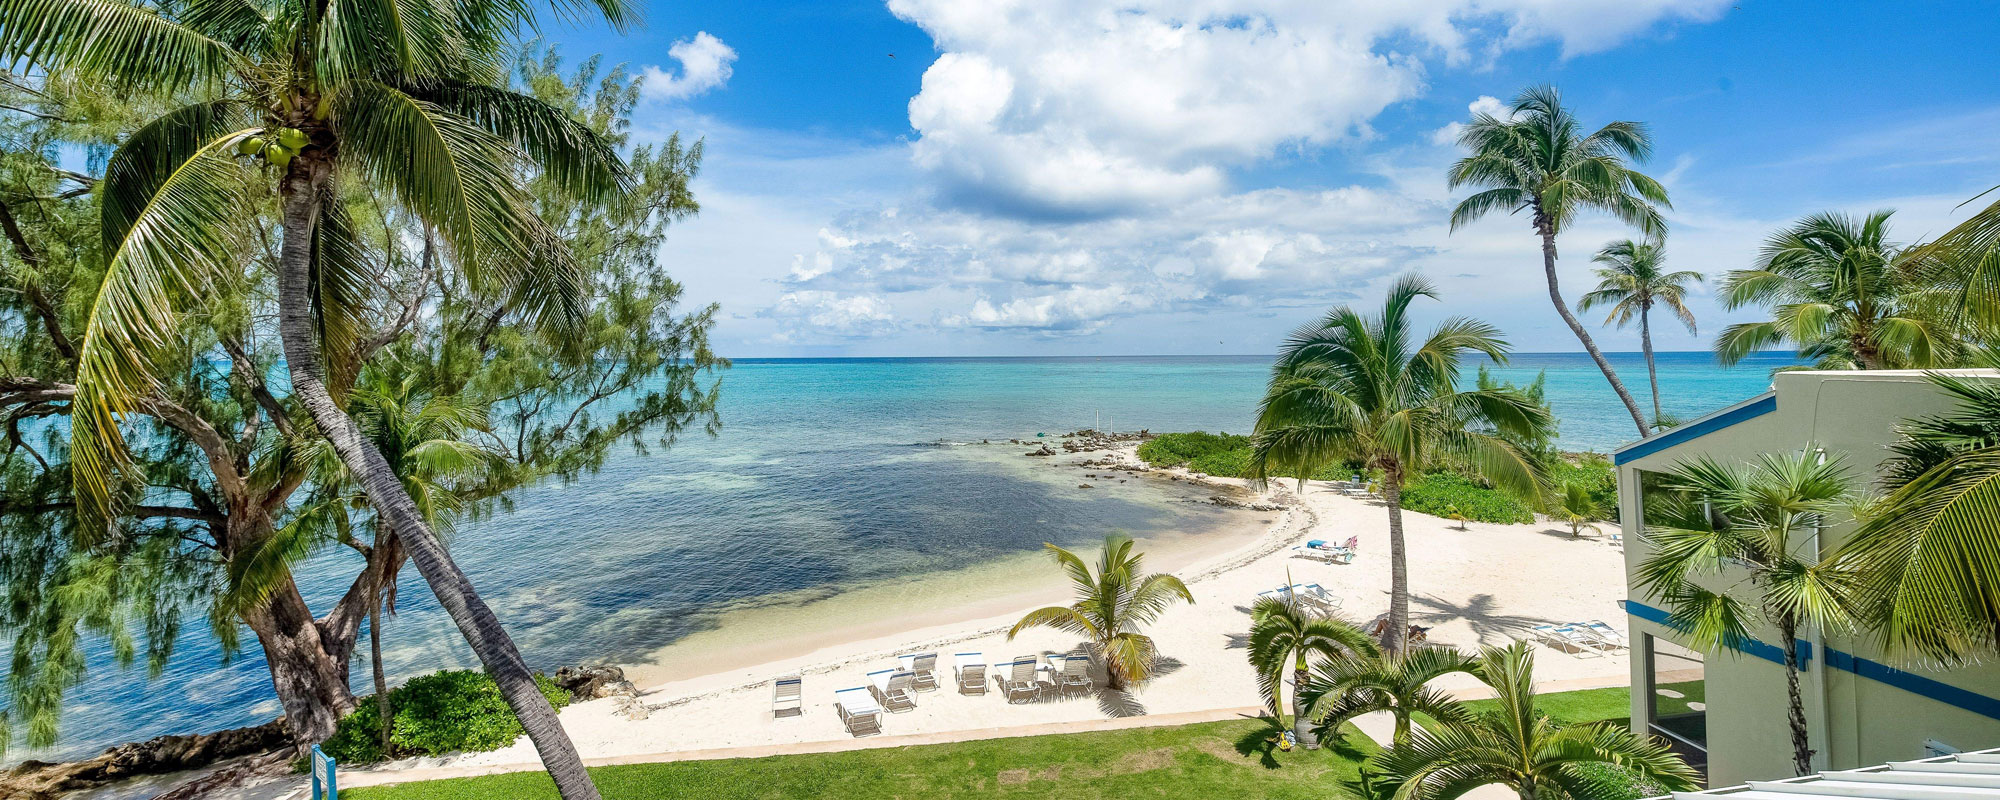 Property investment expected to rise as Cayman exits FATF grey list